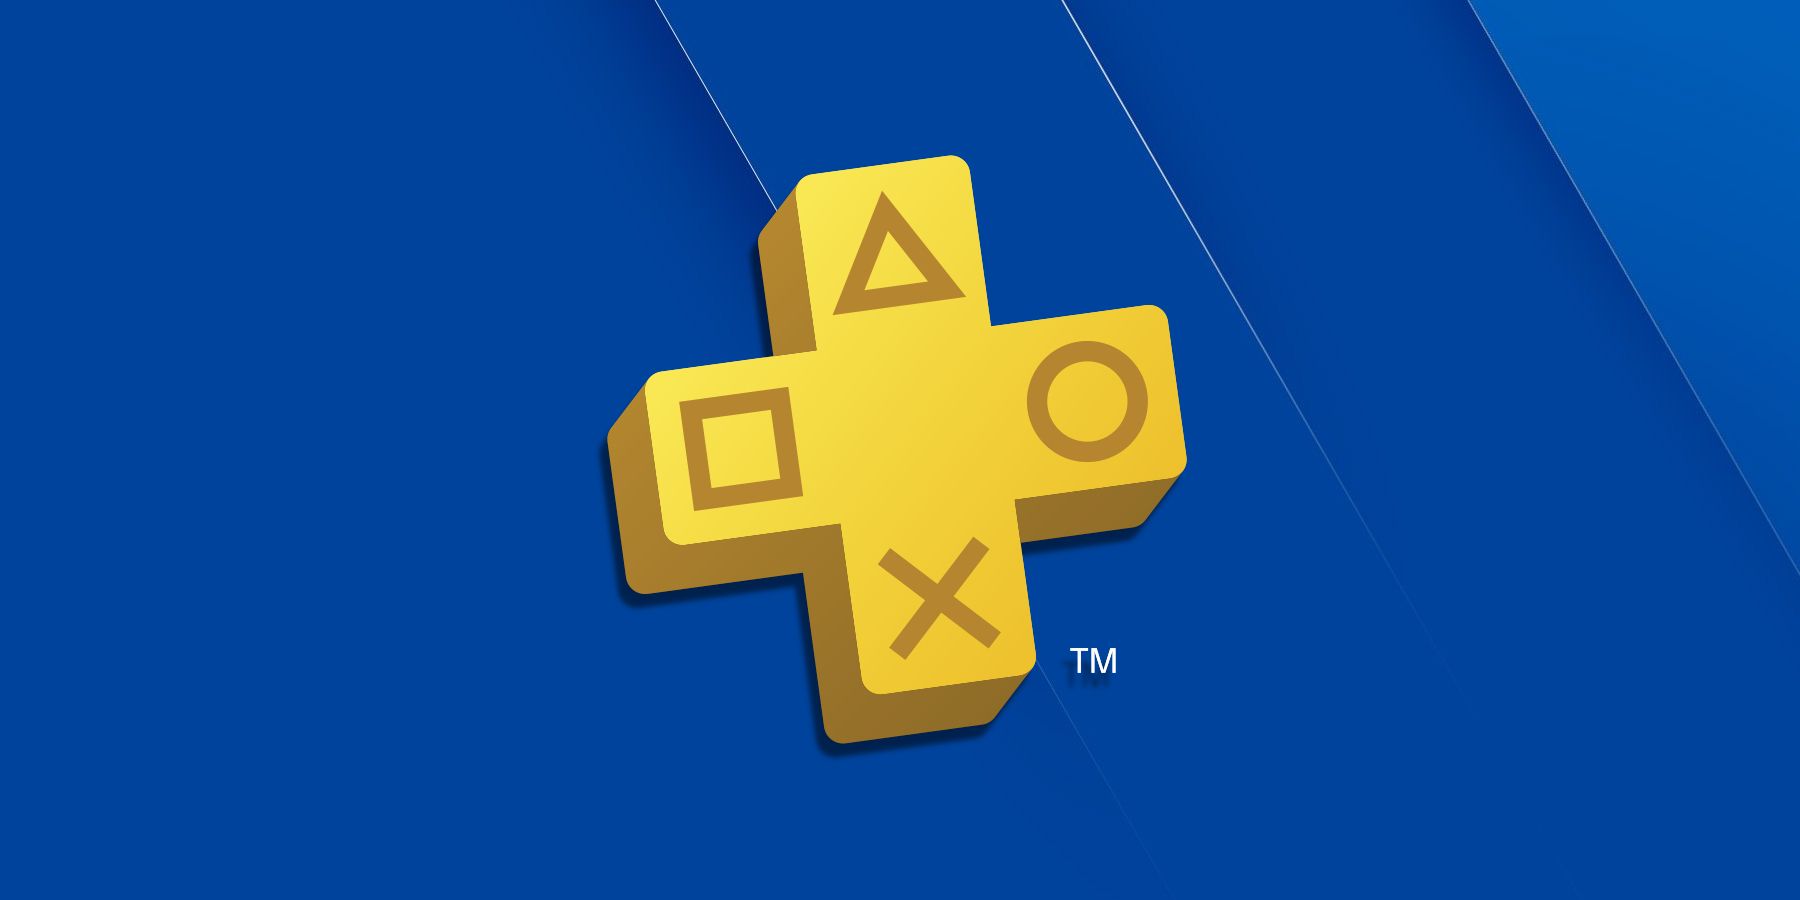 PlayStation Plus Game Catalog lineup for October: Grand Theft Auto: Vice  City – The Definitive Edition, Dragon Quest XI S: Echoes of an Elusive Age,  Assassin's Creed Odyssey – PlayStation.Blog